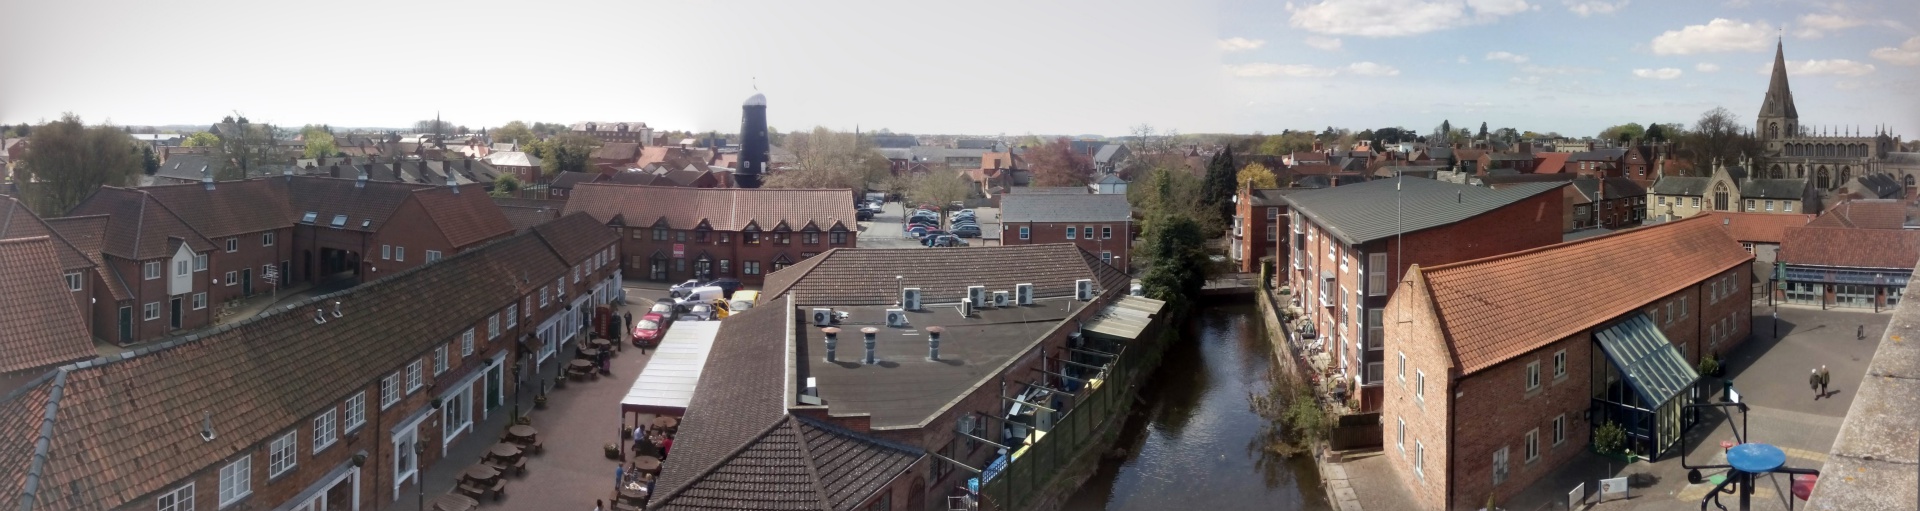 Select this image to see a larger version. IMG 20160504T130742
Sleaford from The Hub.
